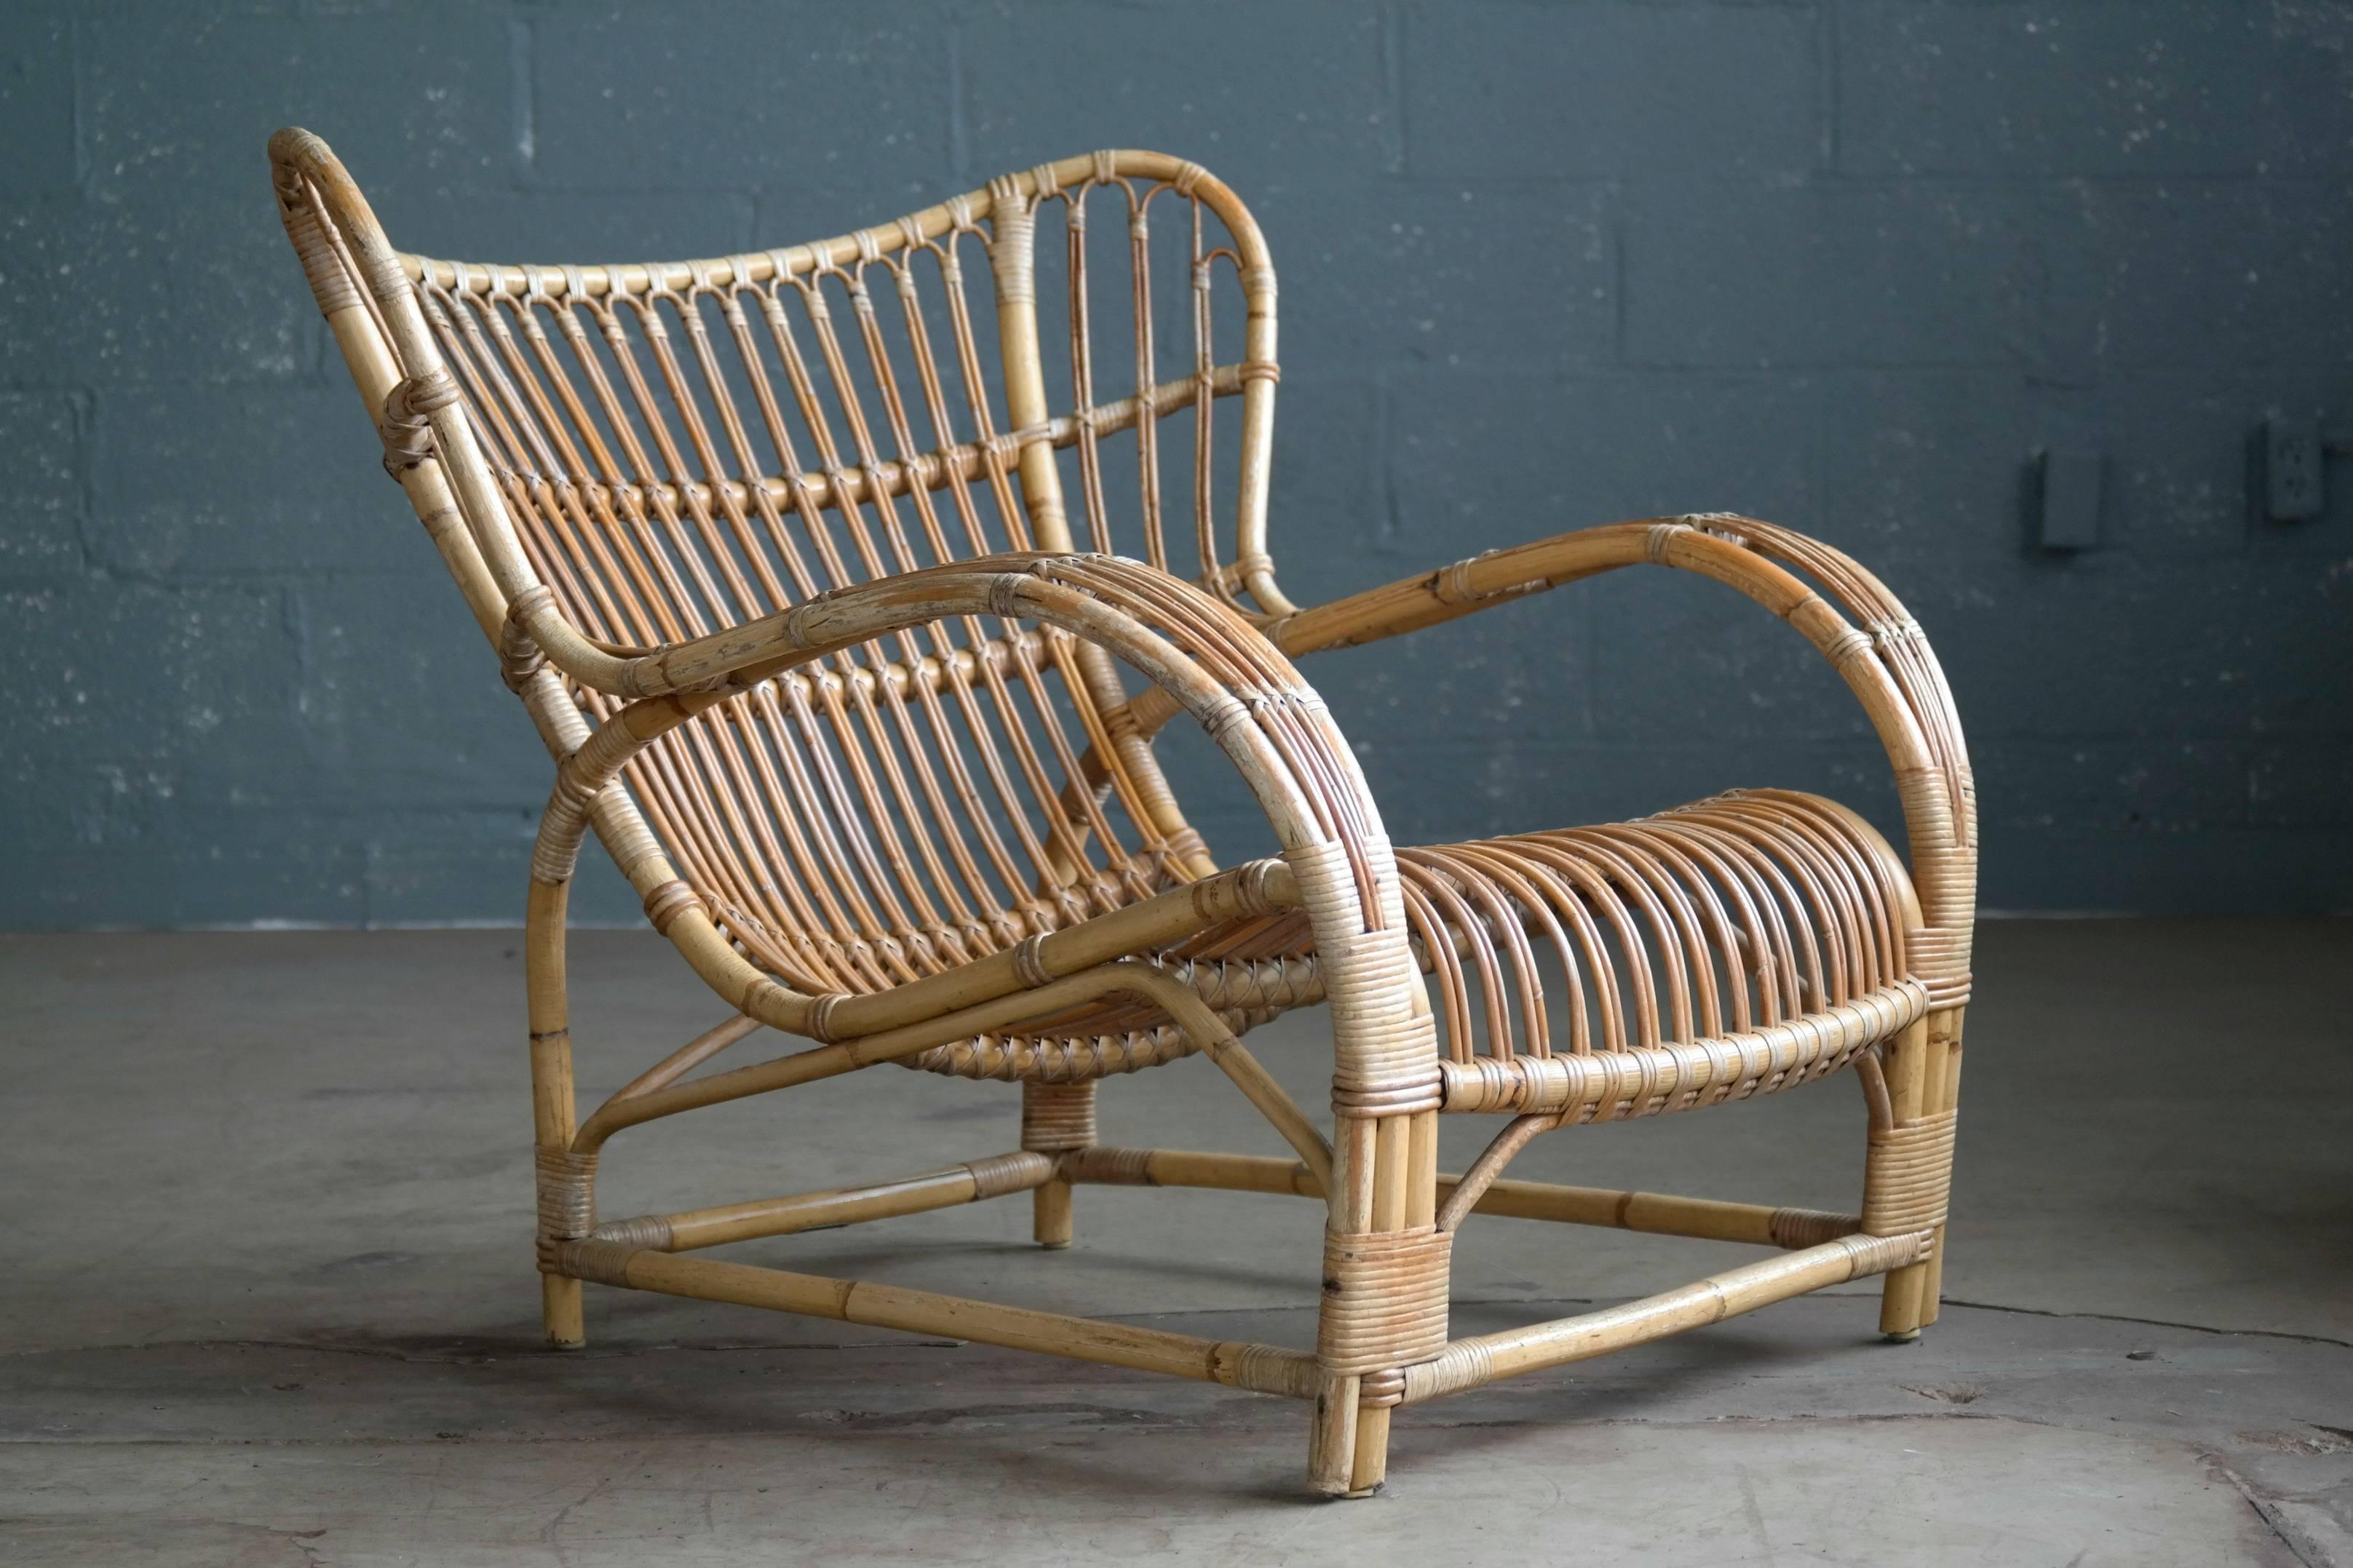 Very rare and sought after Viggo Boesen designed rattan lounge chair model VB 136 for E.V.A. Nissen. Designed in 1936 and most likely manufactured around that time. The chairs till carries the maker's plaque. 

While Boesen's rattan designs has